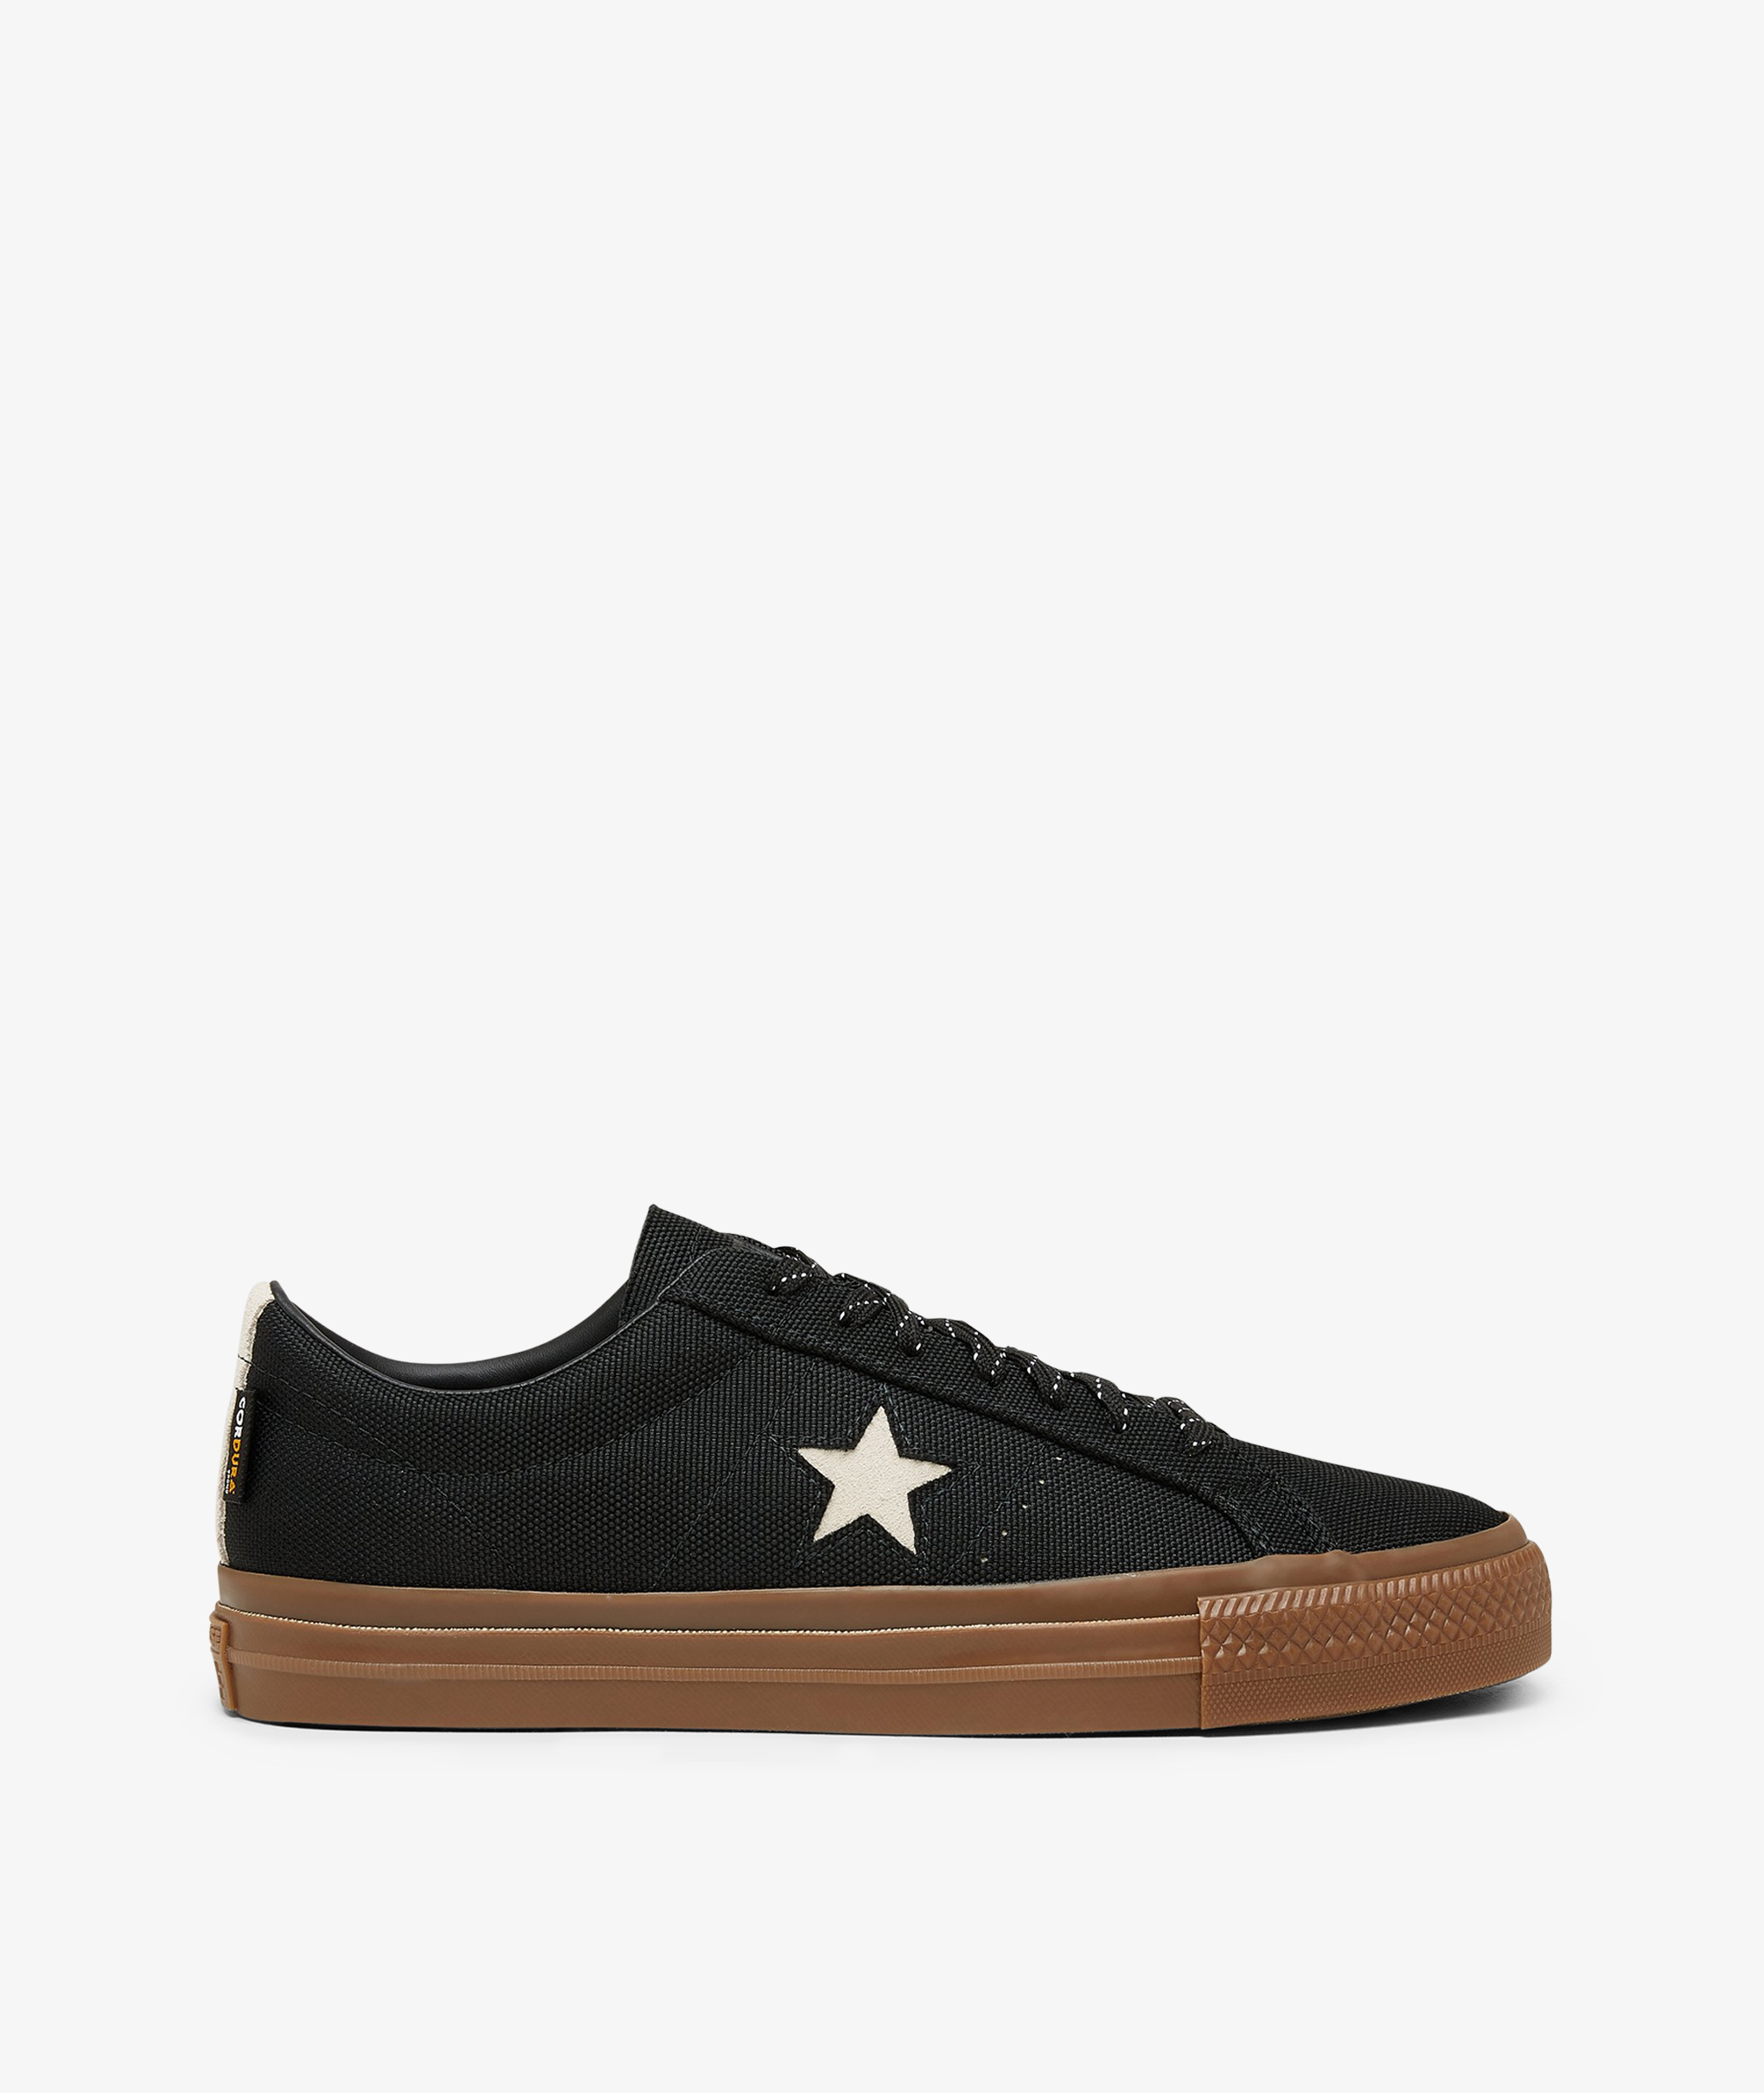 Norse Store | Shipping Worldwide - Converse One Star Pro OX